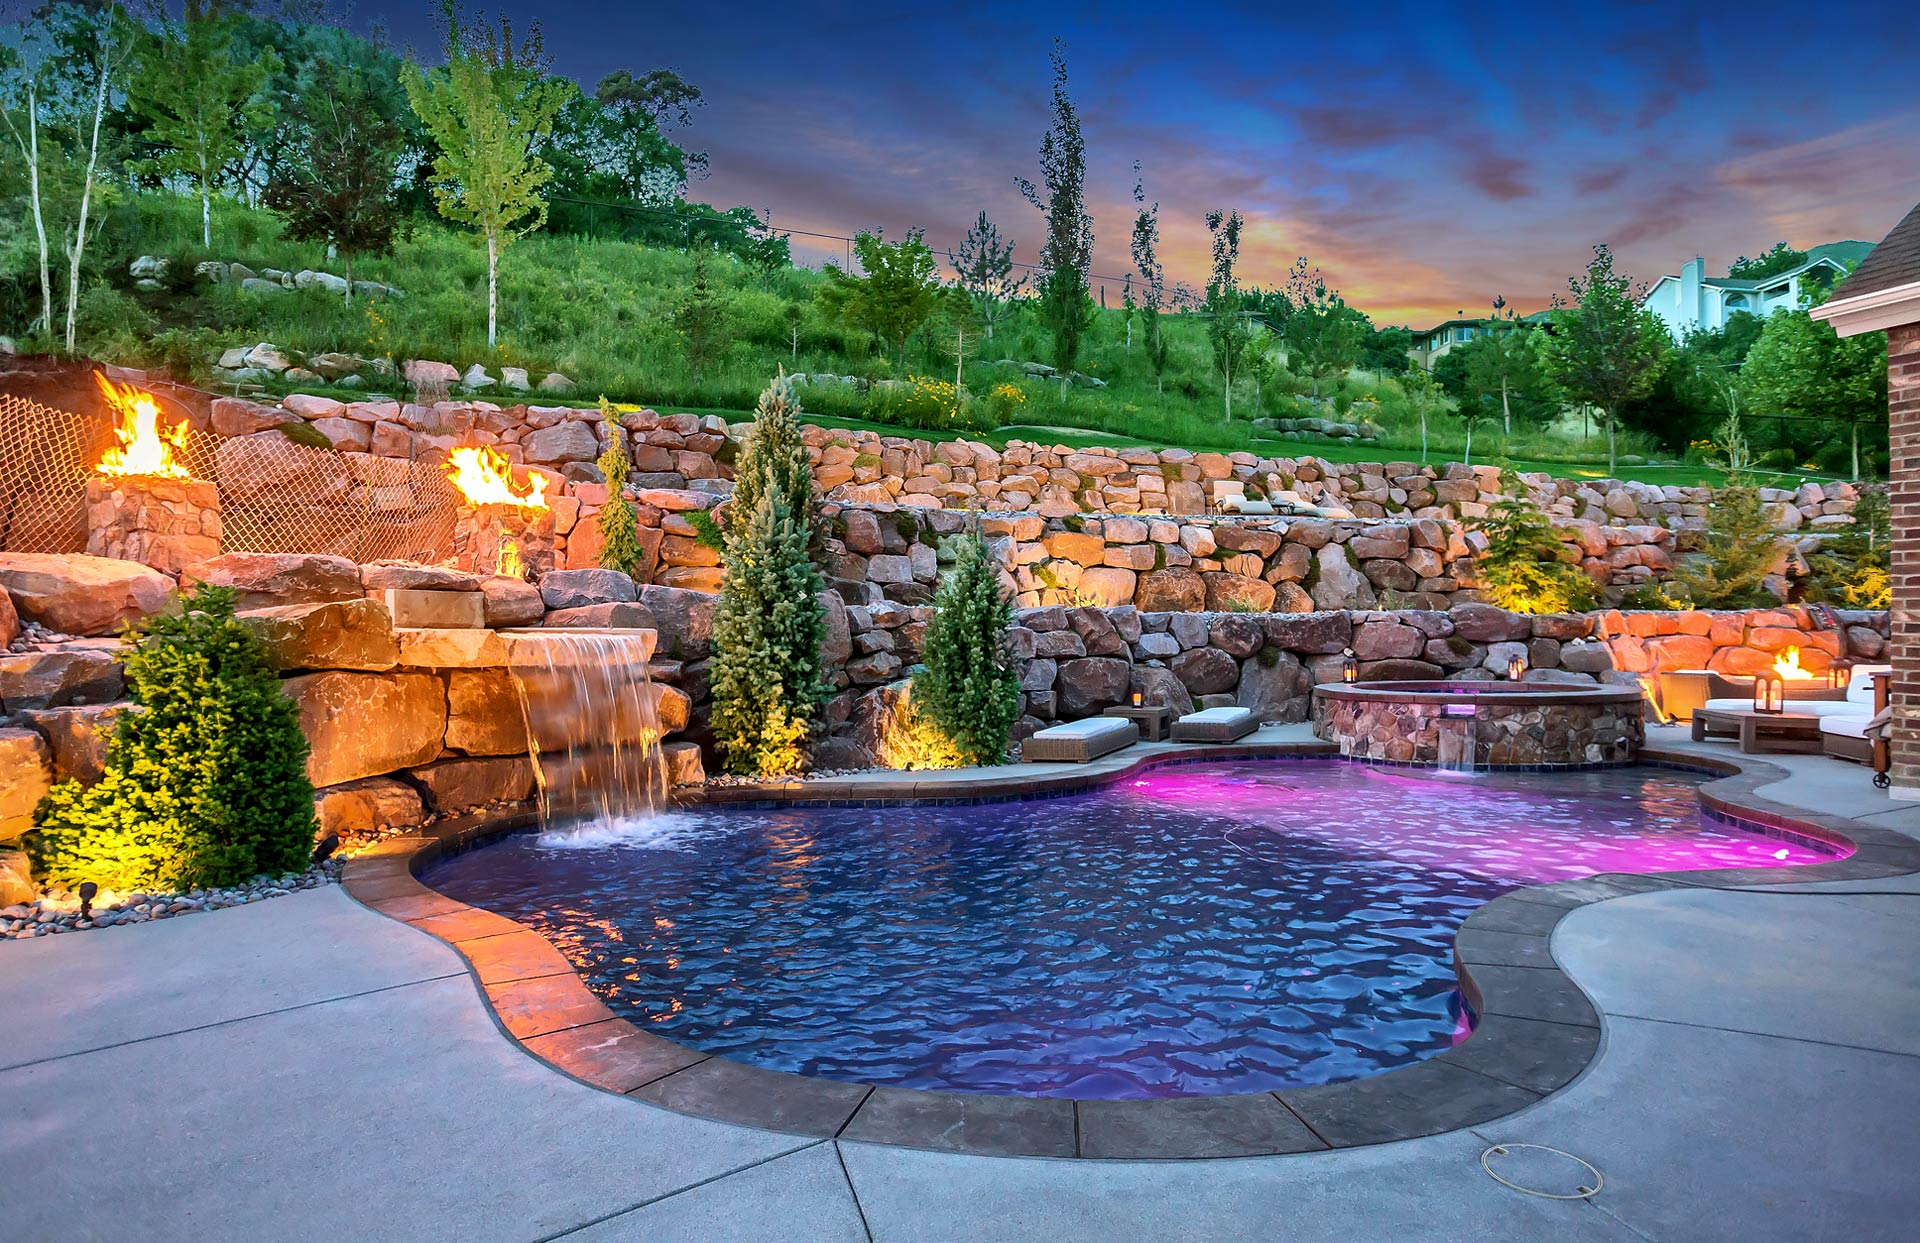 Rock water feature, rock hot tub, swimming pool, stone terraced wall and fire pit